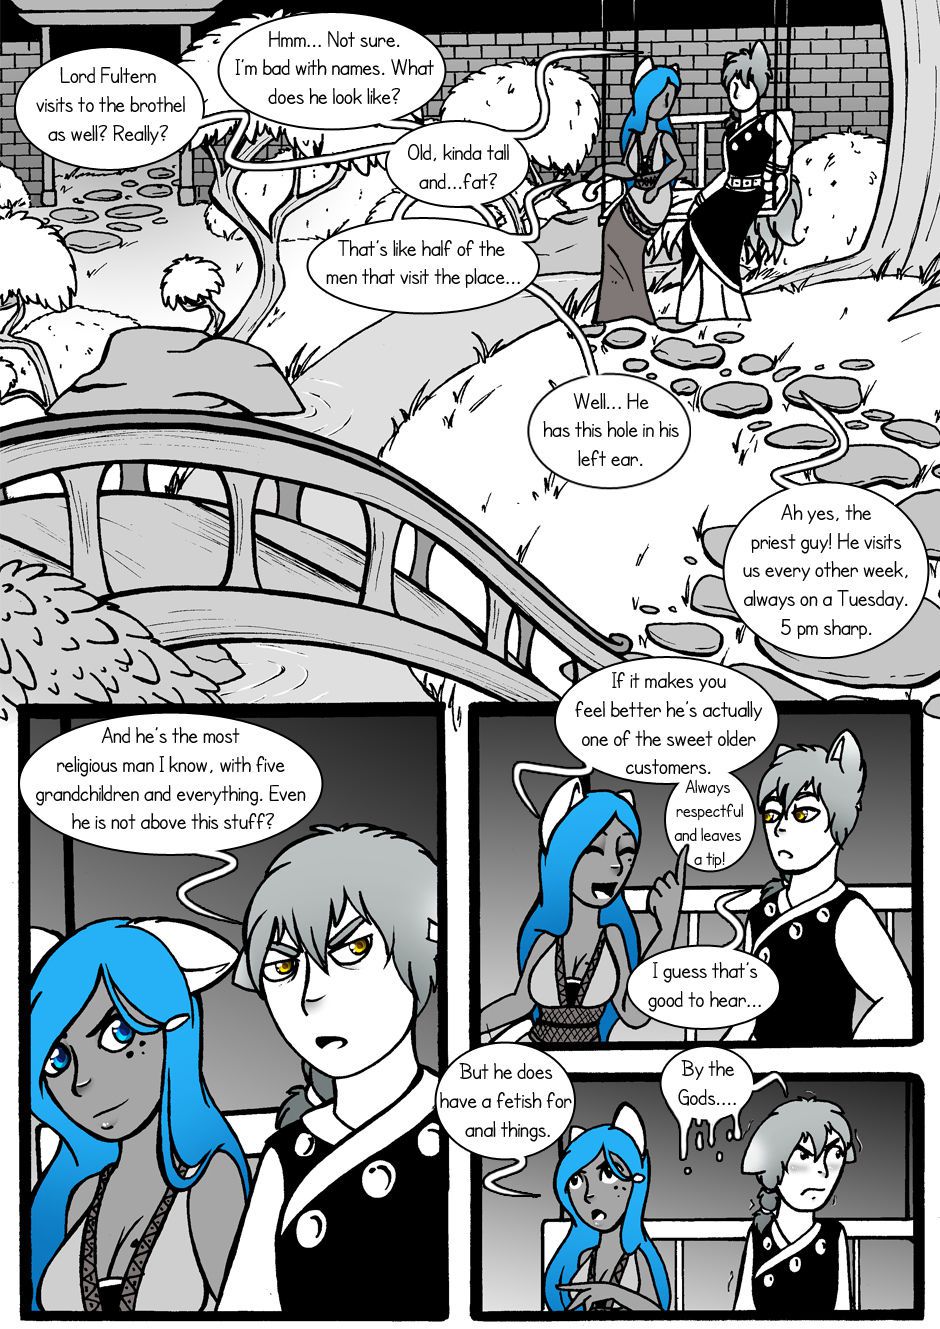 [Jeny-jen94] Between Kings and Queens [Ongoing] 59